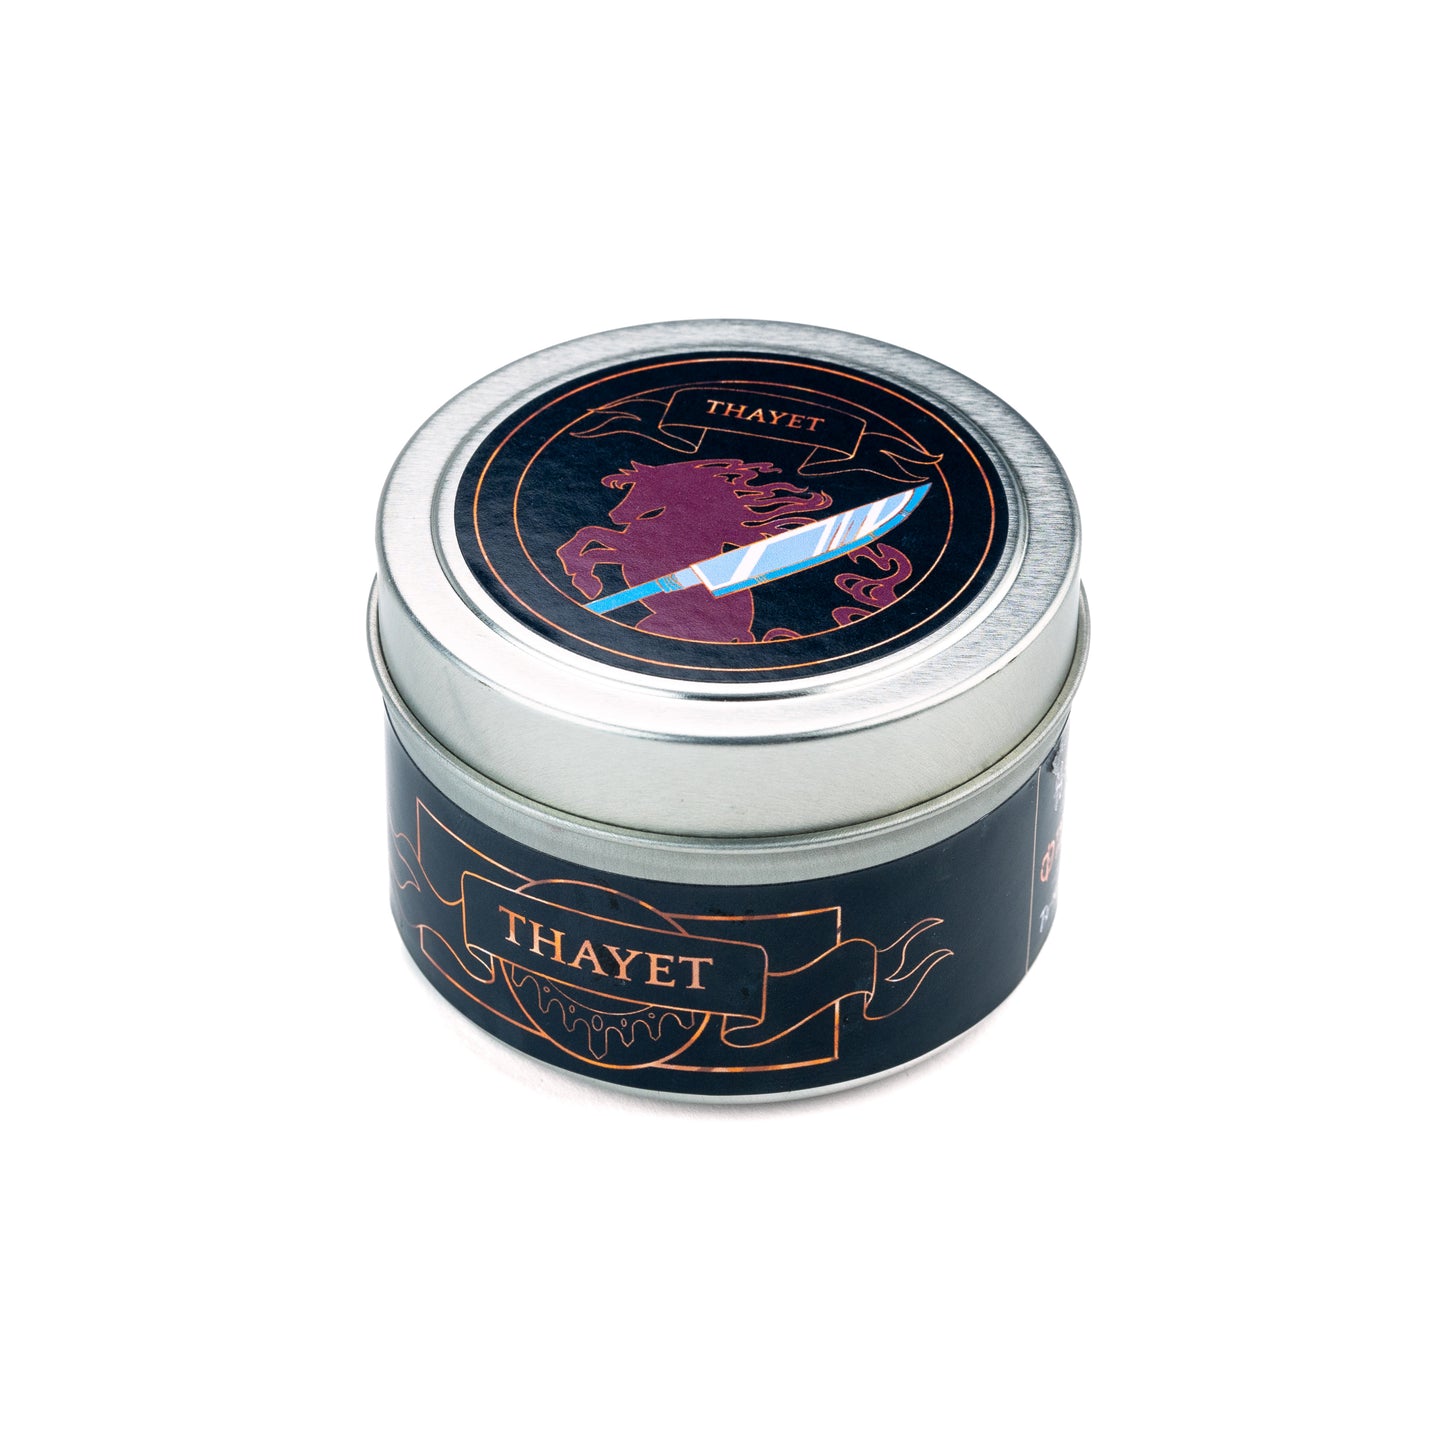 Thayet Candle - Tamora Pierce Officially Licensed - Soy Vegan Candle